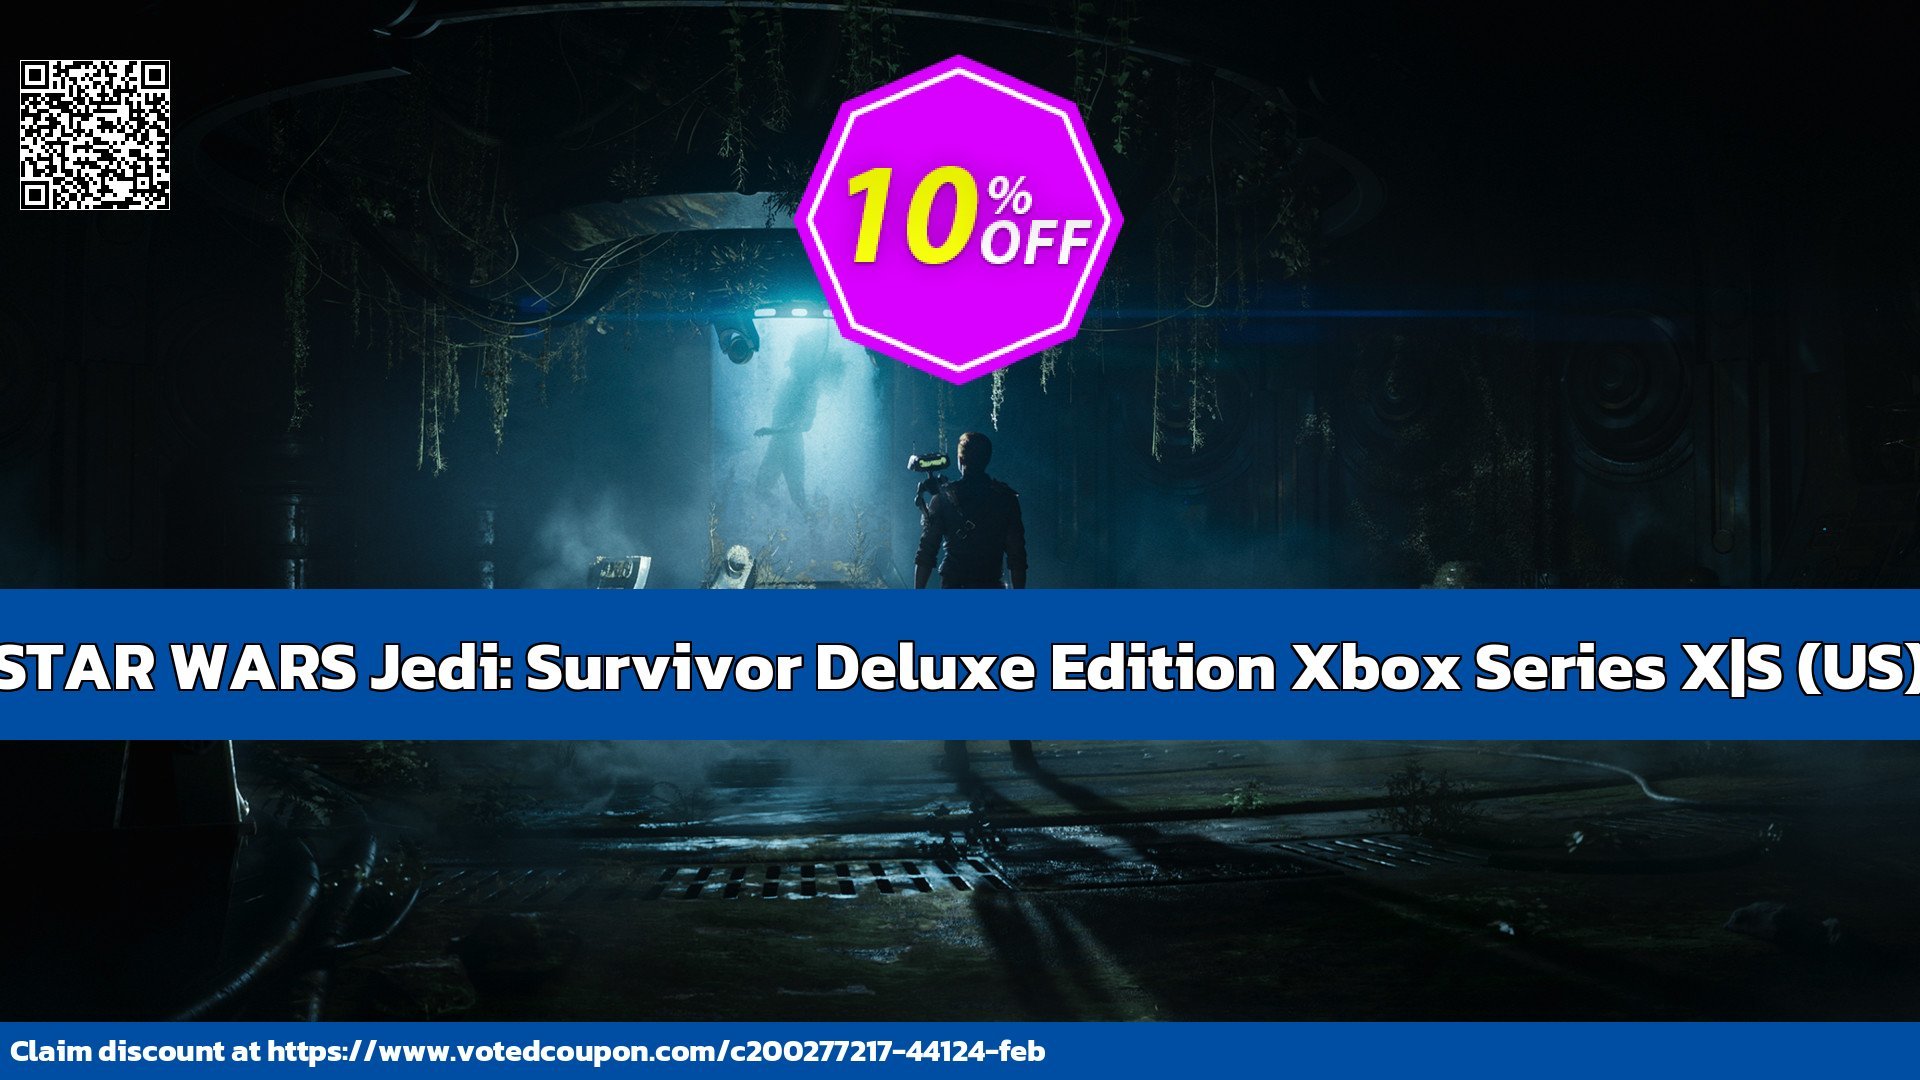 STAR WARS Jedi: Survivor Deluxe Edition Xbox Series X|S, US  Coupon Code May 2024, 10% OFF - VotedCoupon